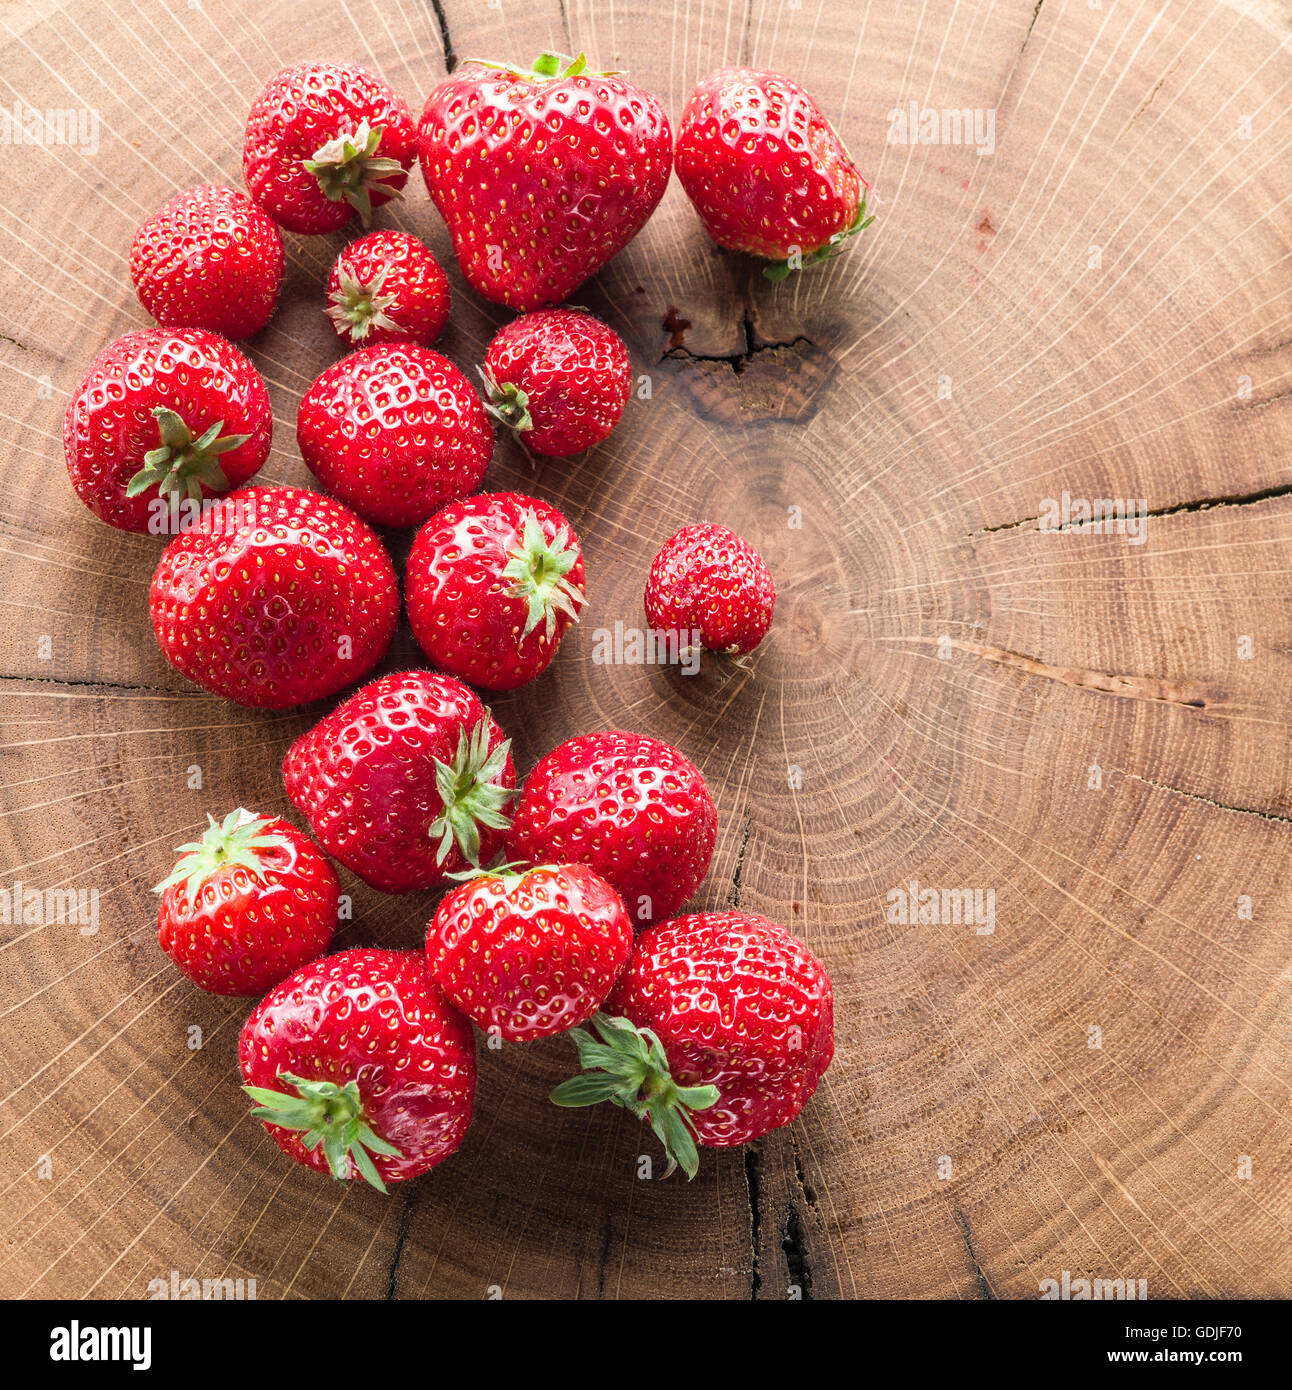 Strawberries on the old wooden board. Stock Photo